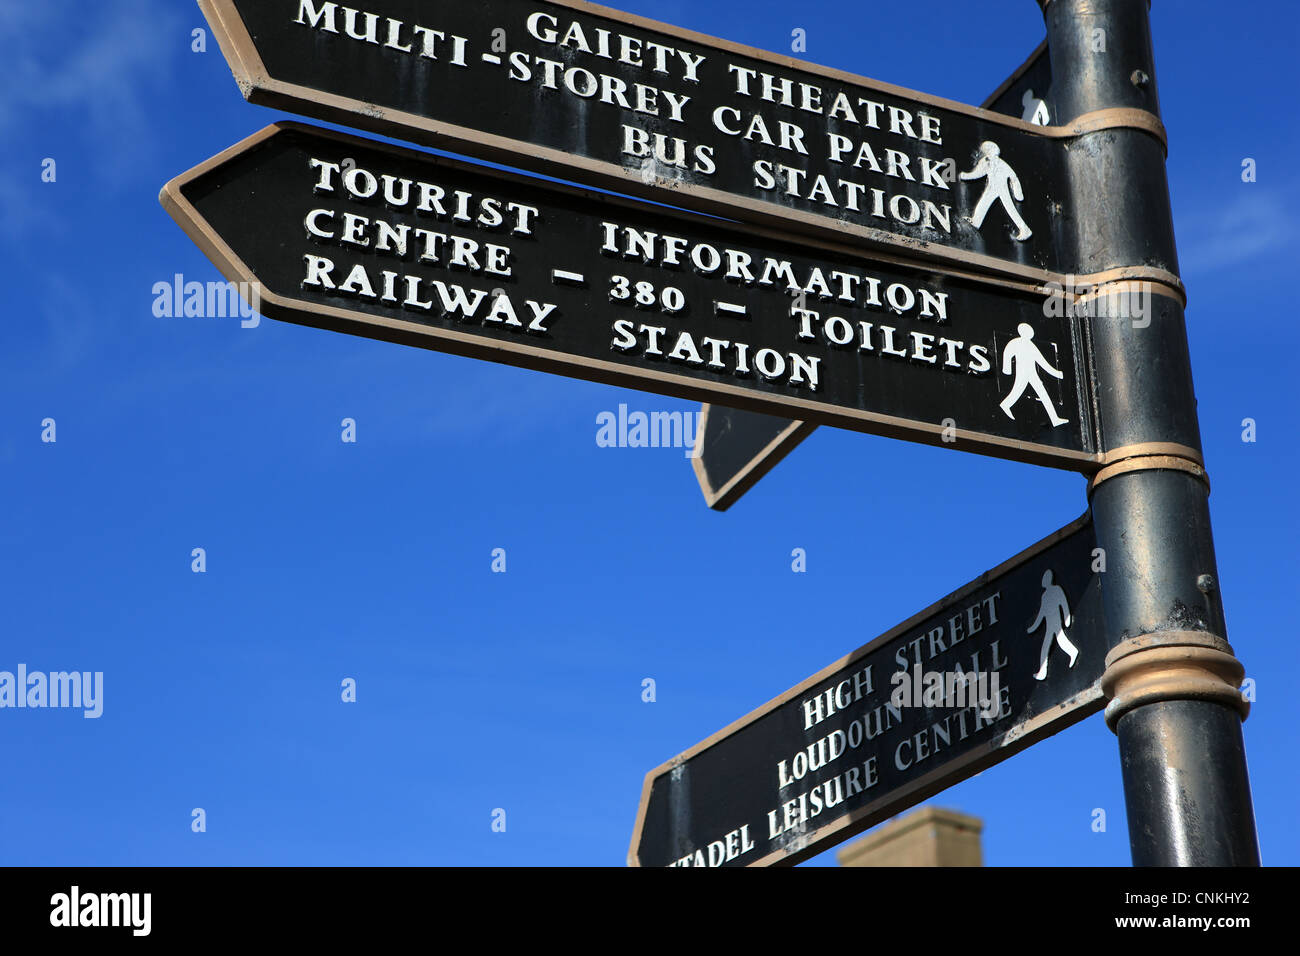 Tourist Information signage in the Ayrshire town of Ayr Stock Photo